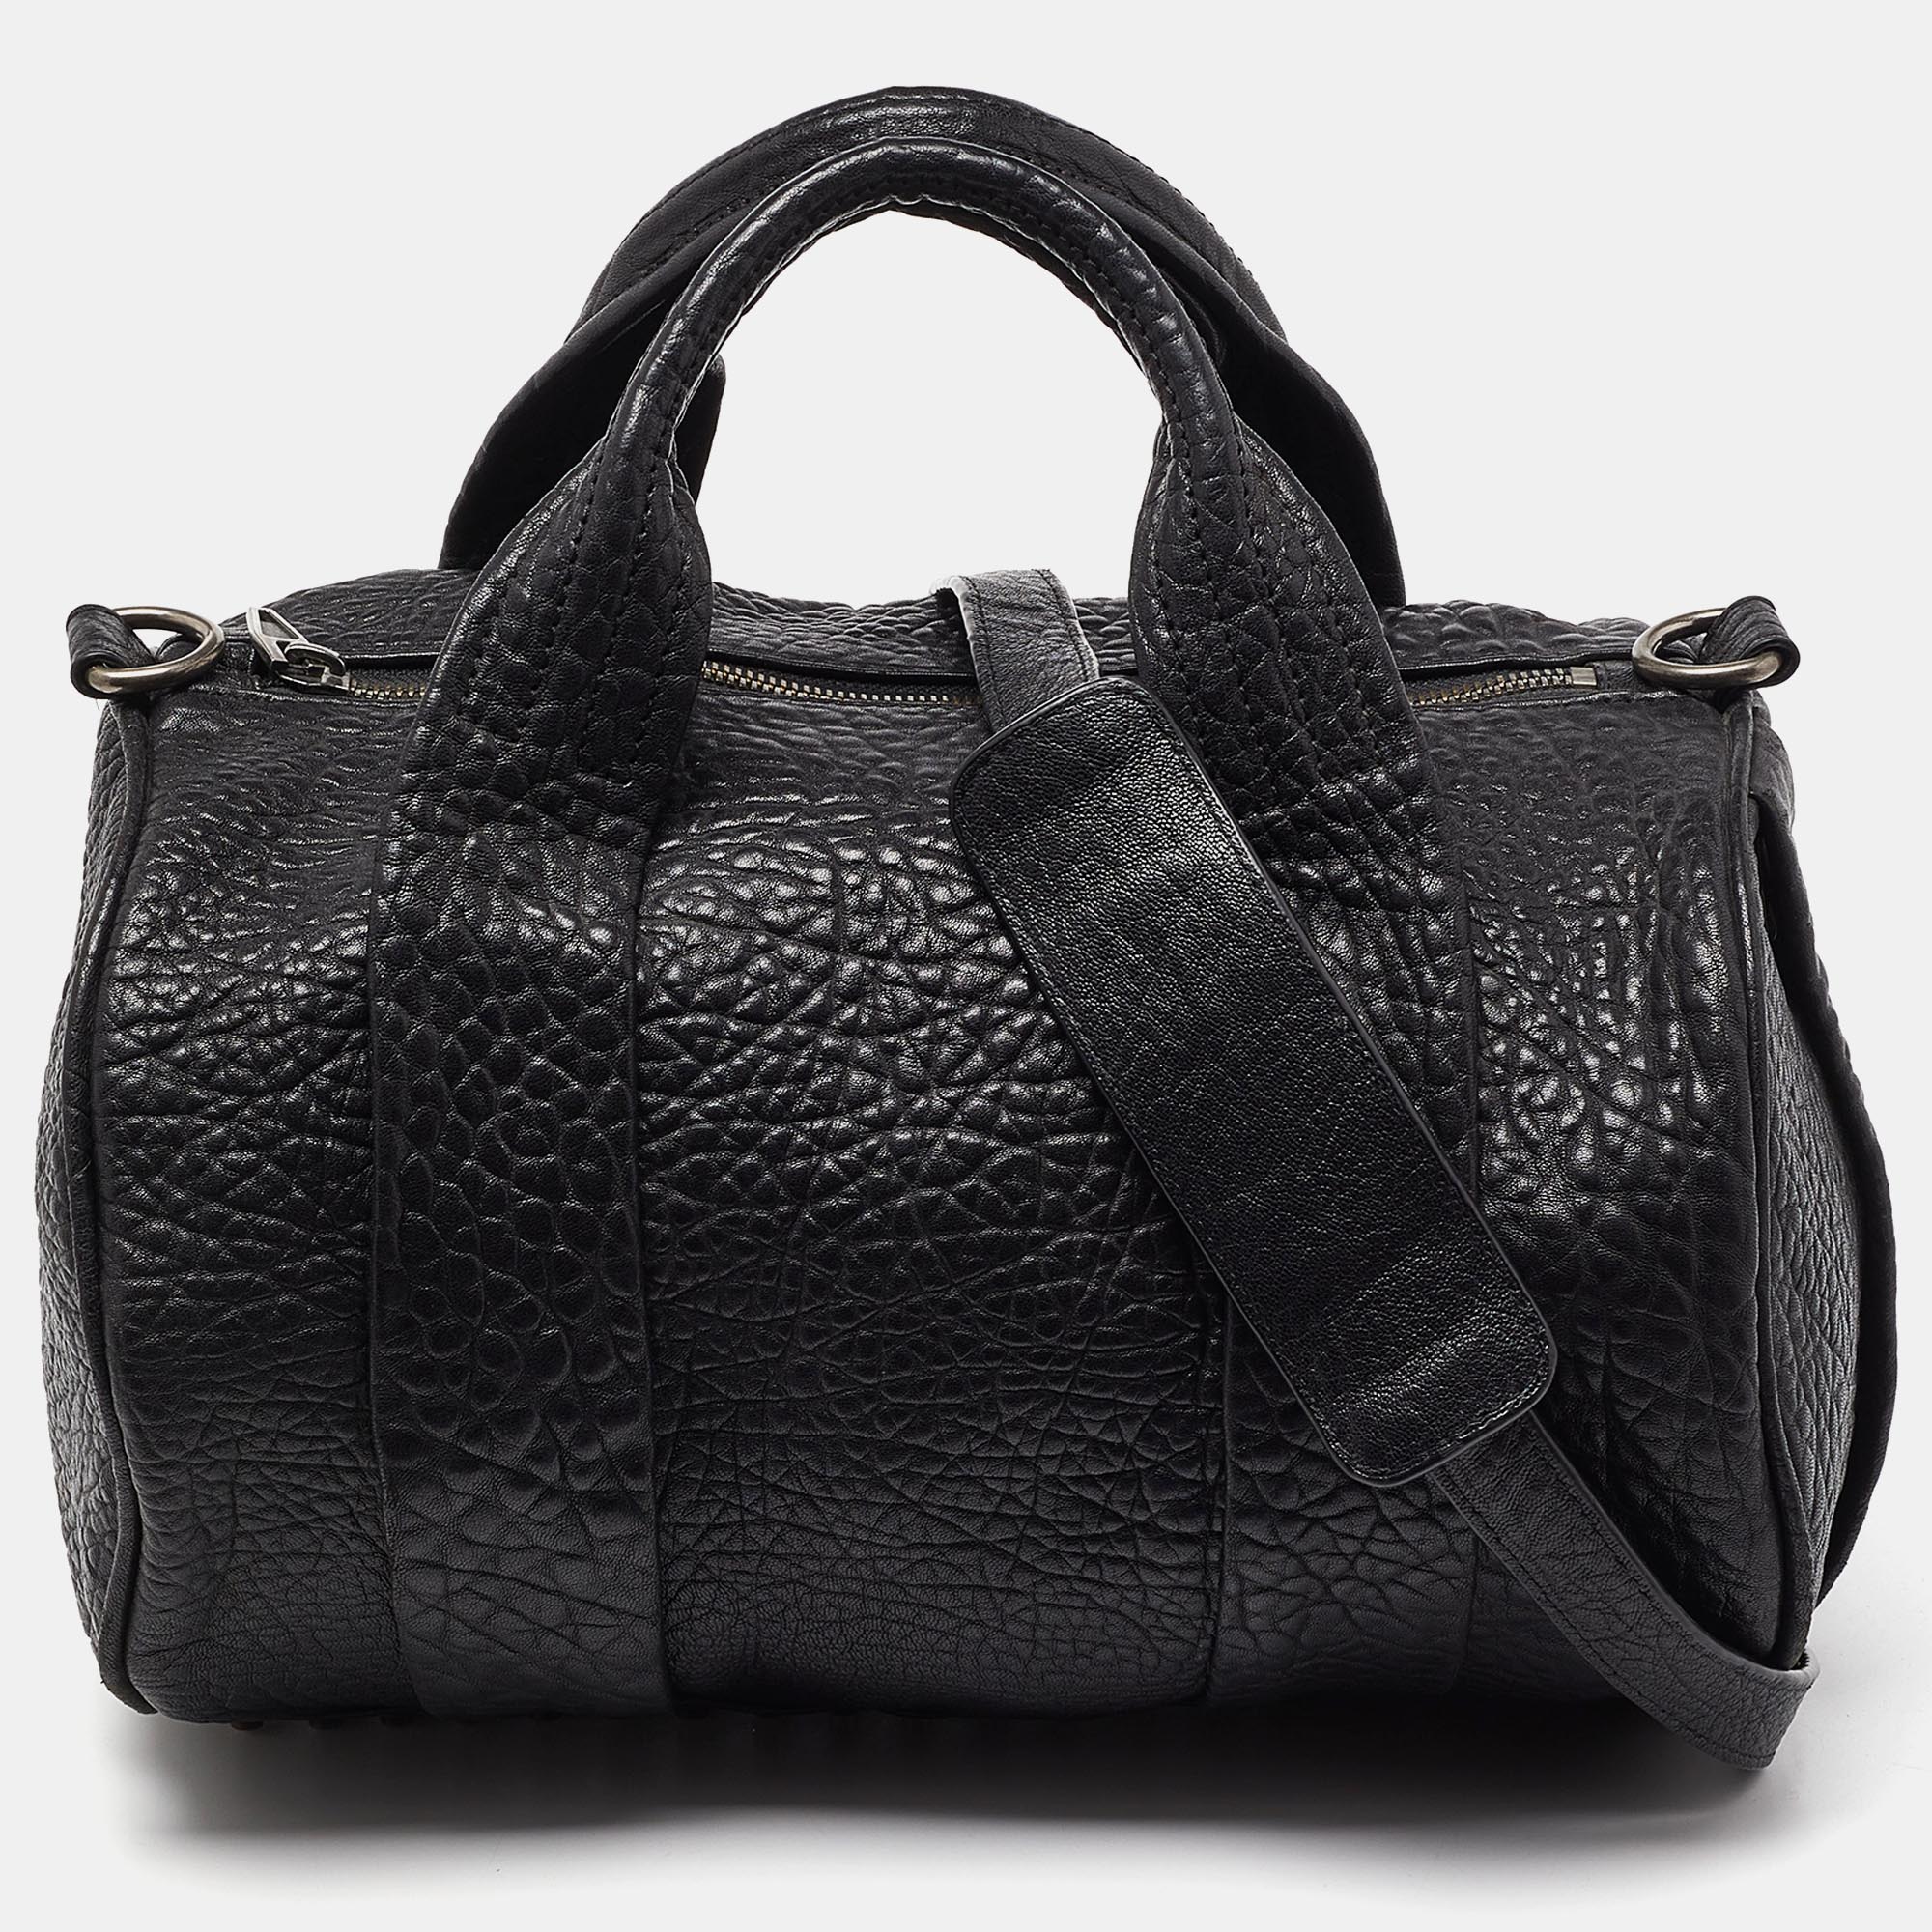 Pre-owned Alexander Wang Black Pebbled Leather Rocco Duffle Bag